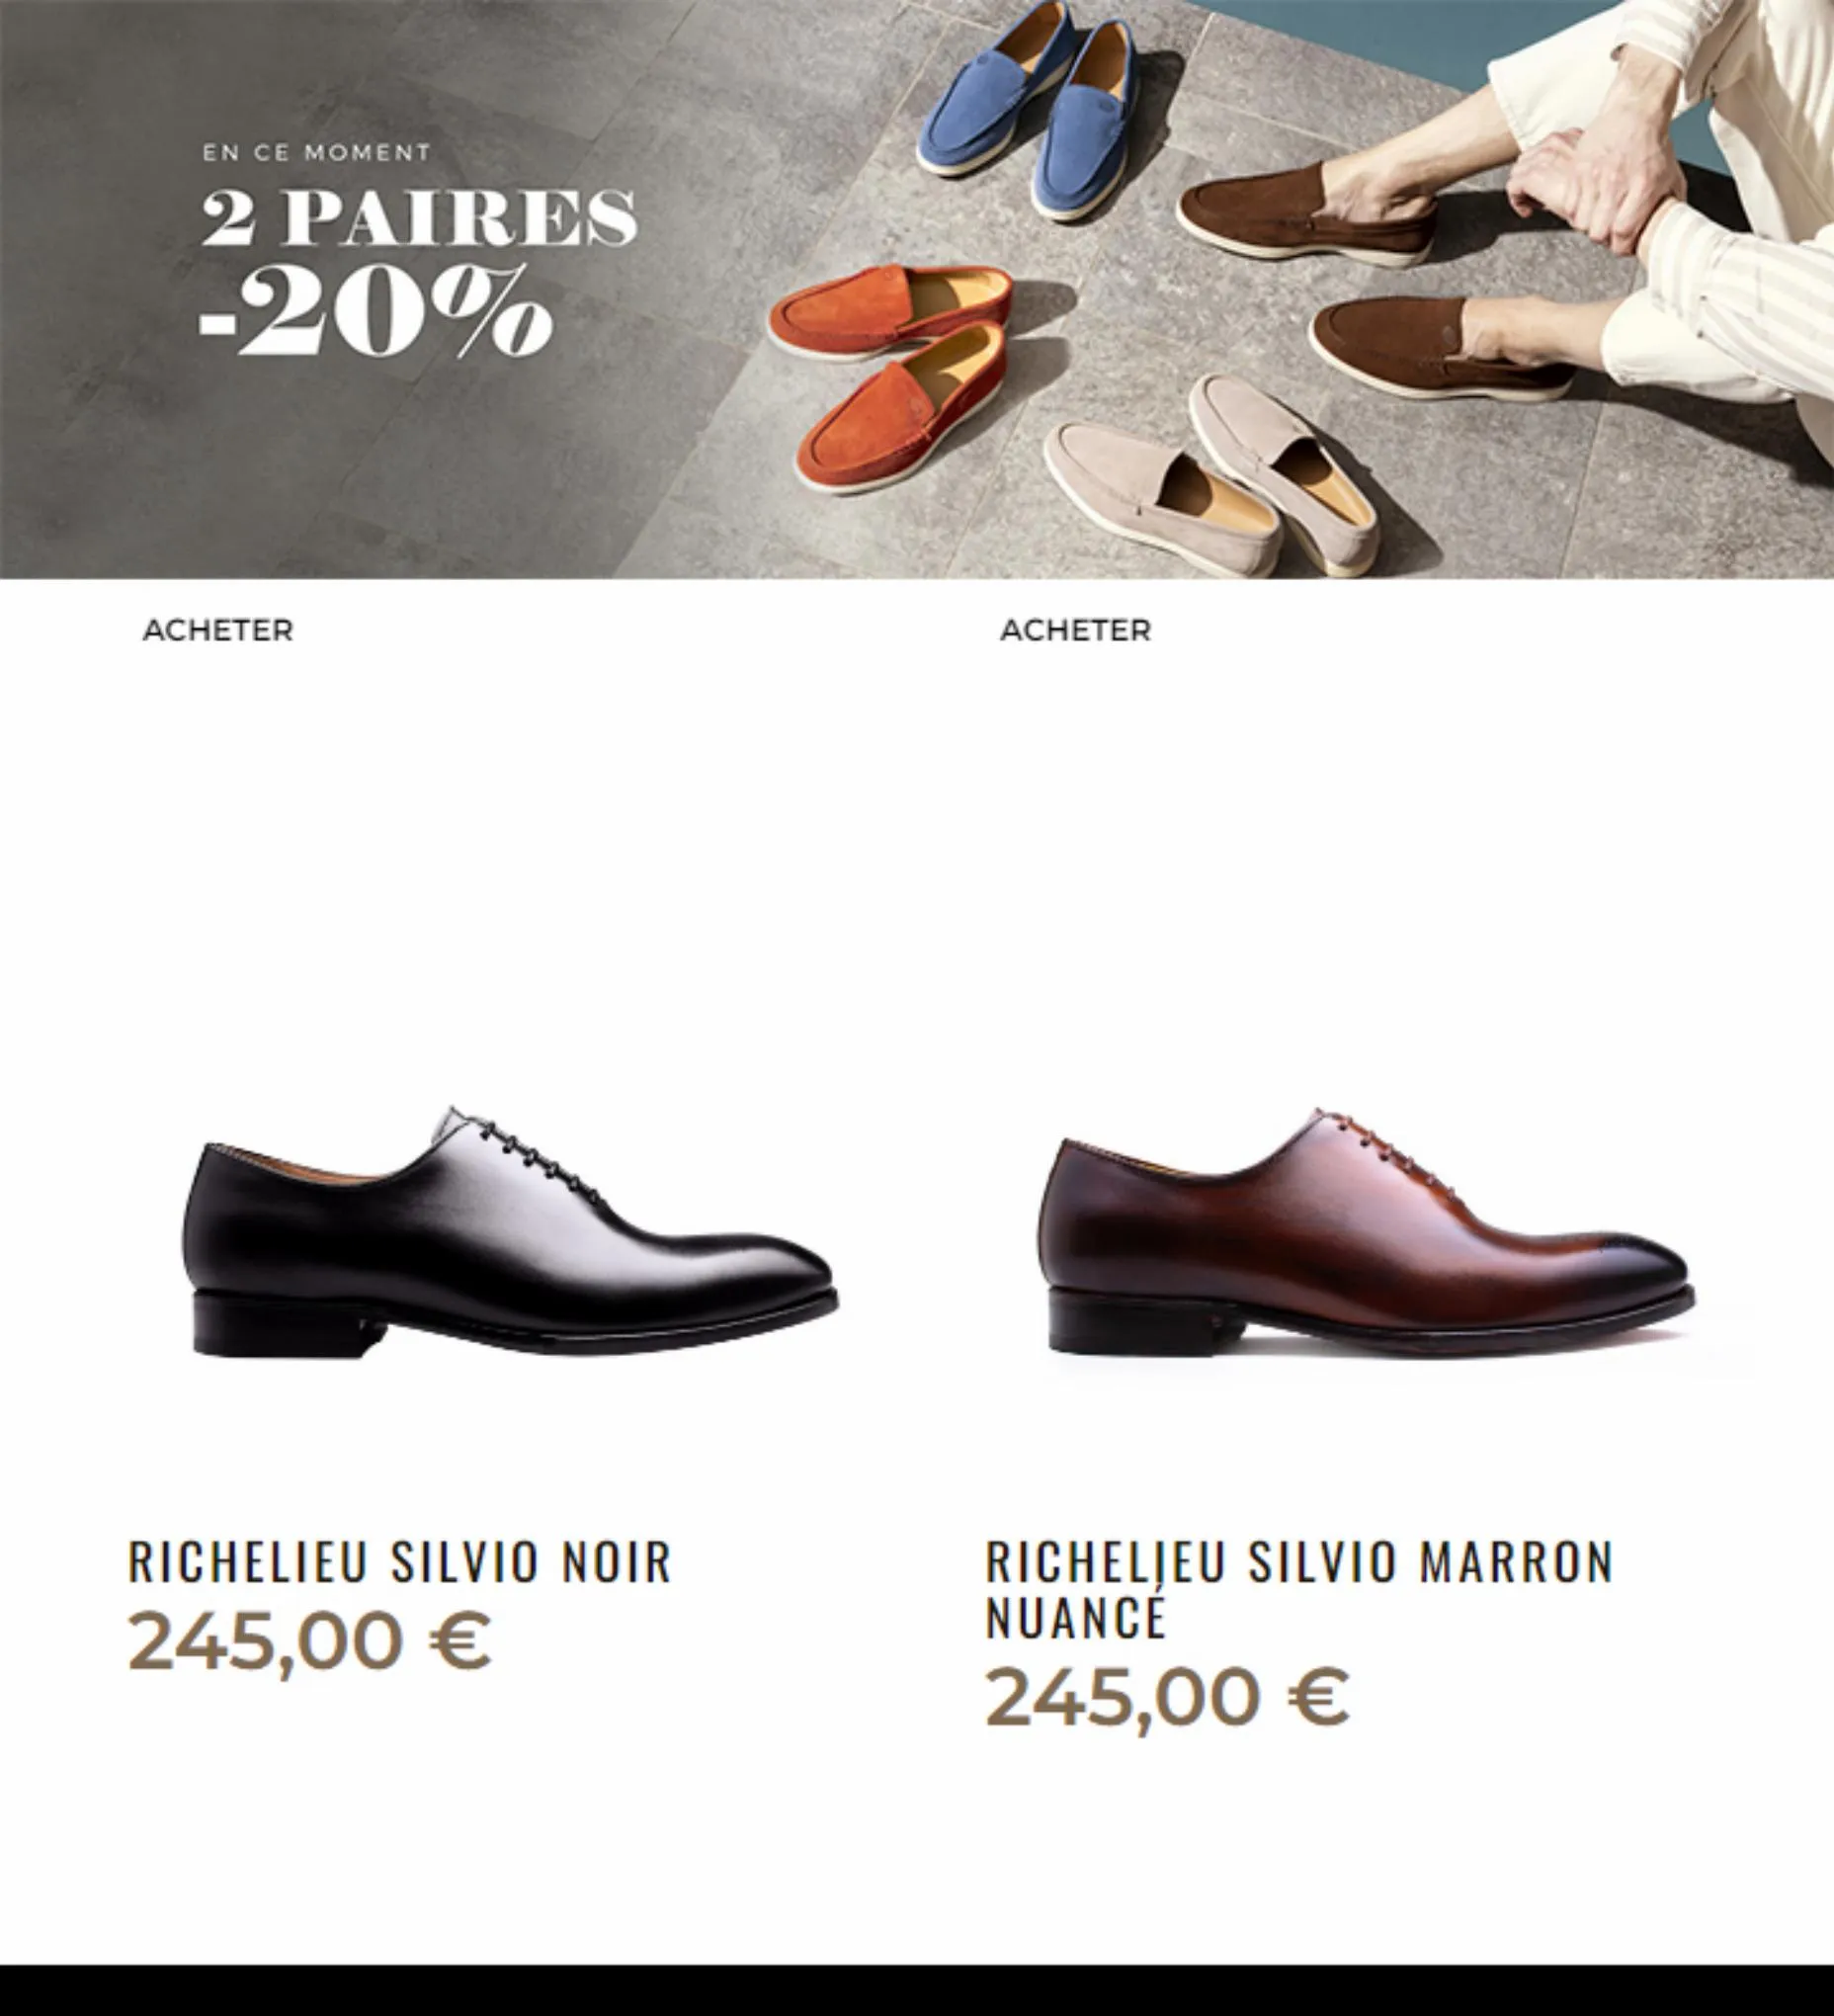 Catalogue 2 Paires -20%, page 00002